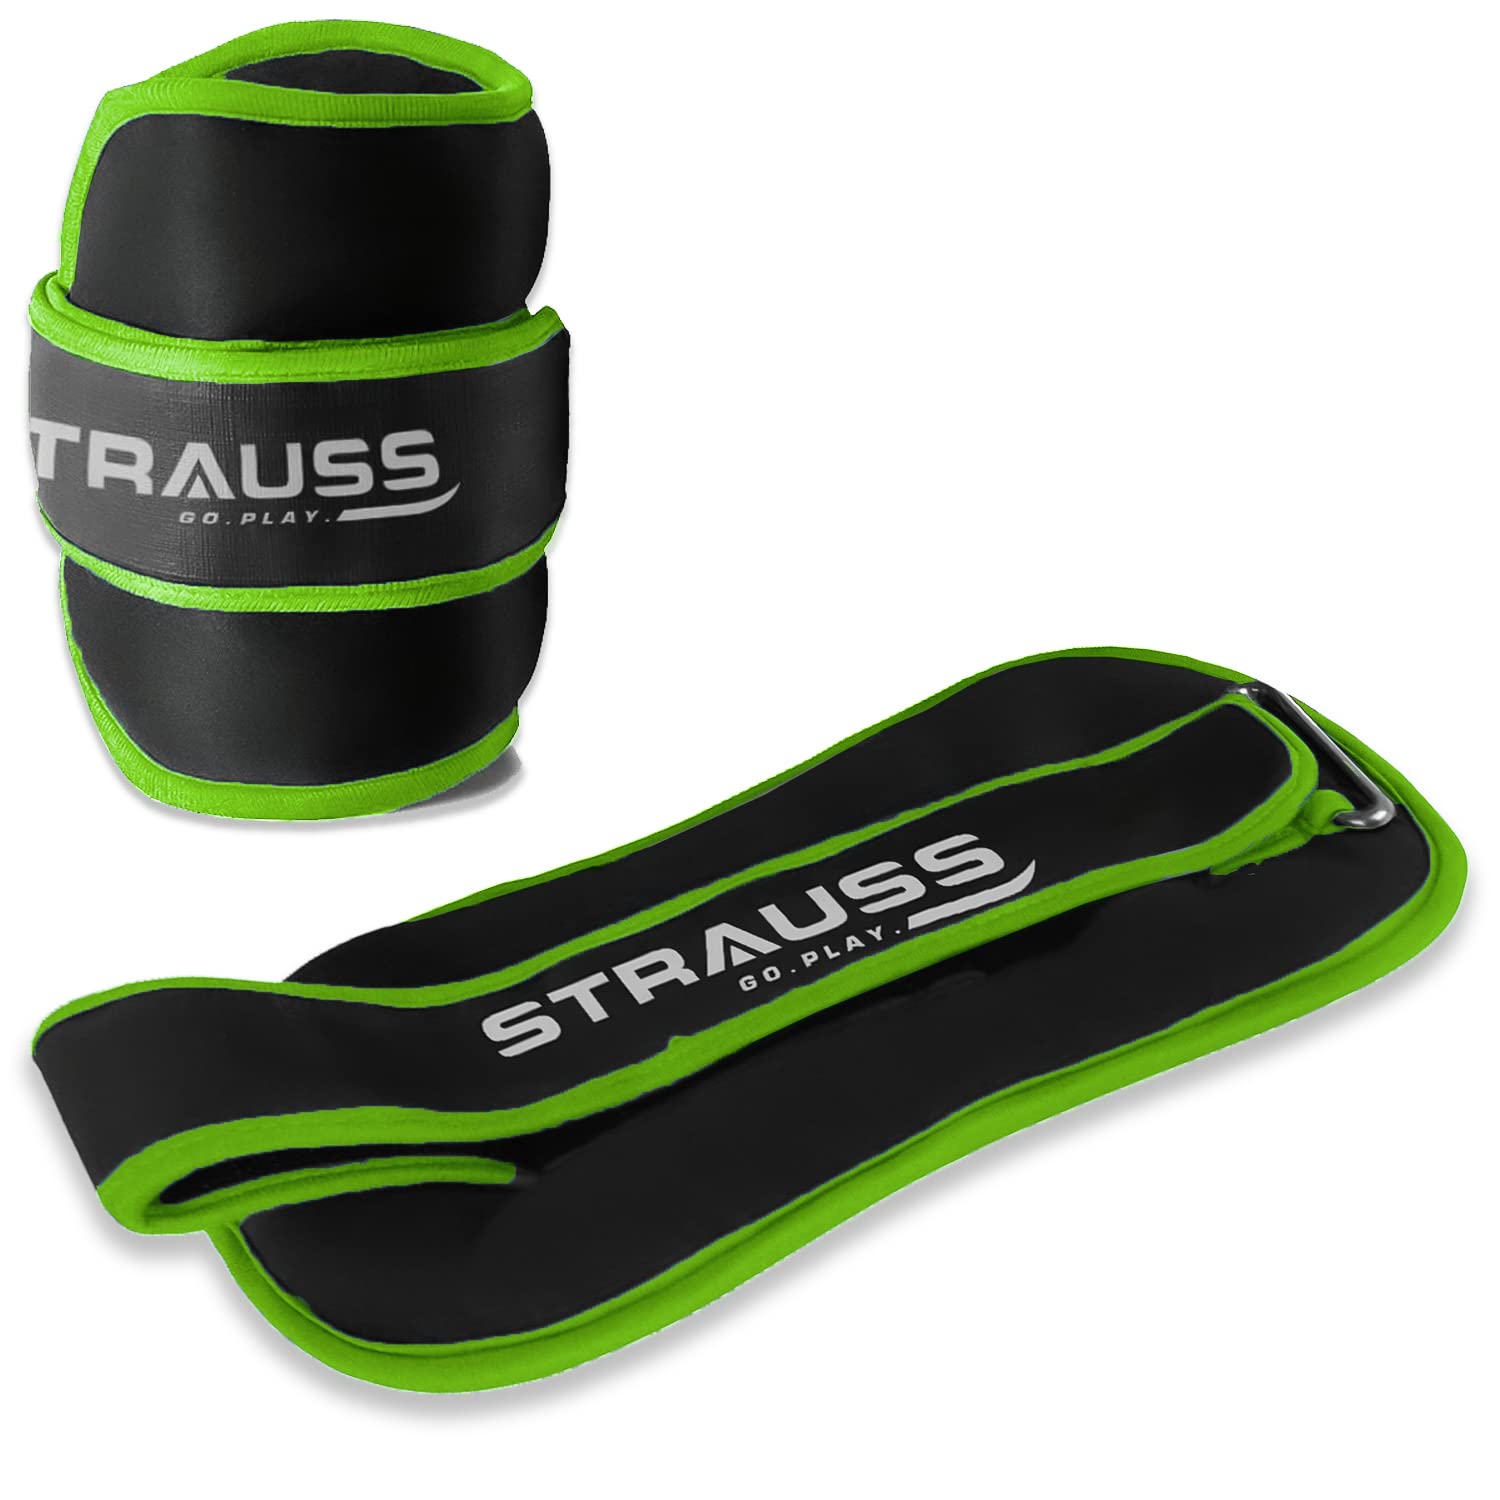 Strauss Round Shape Adjustable Ankle Weight/Wrist Weights 1.5 KG X 2 | Ideal for Walking, Running, Jogging, Cycling, Gym, Workout & Strength Training | Easy to Use on Ankle, Wrist, Leg, (Green)